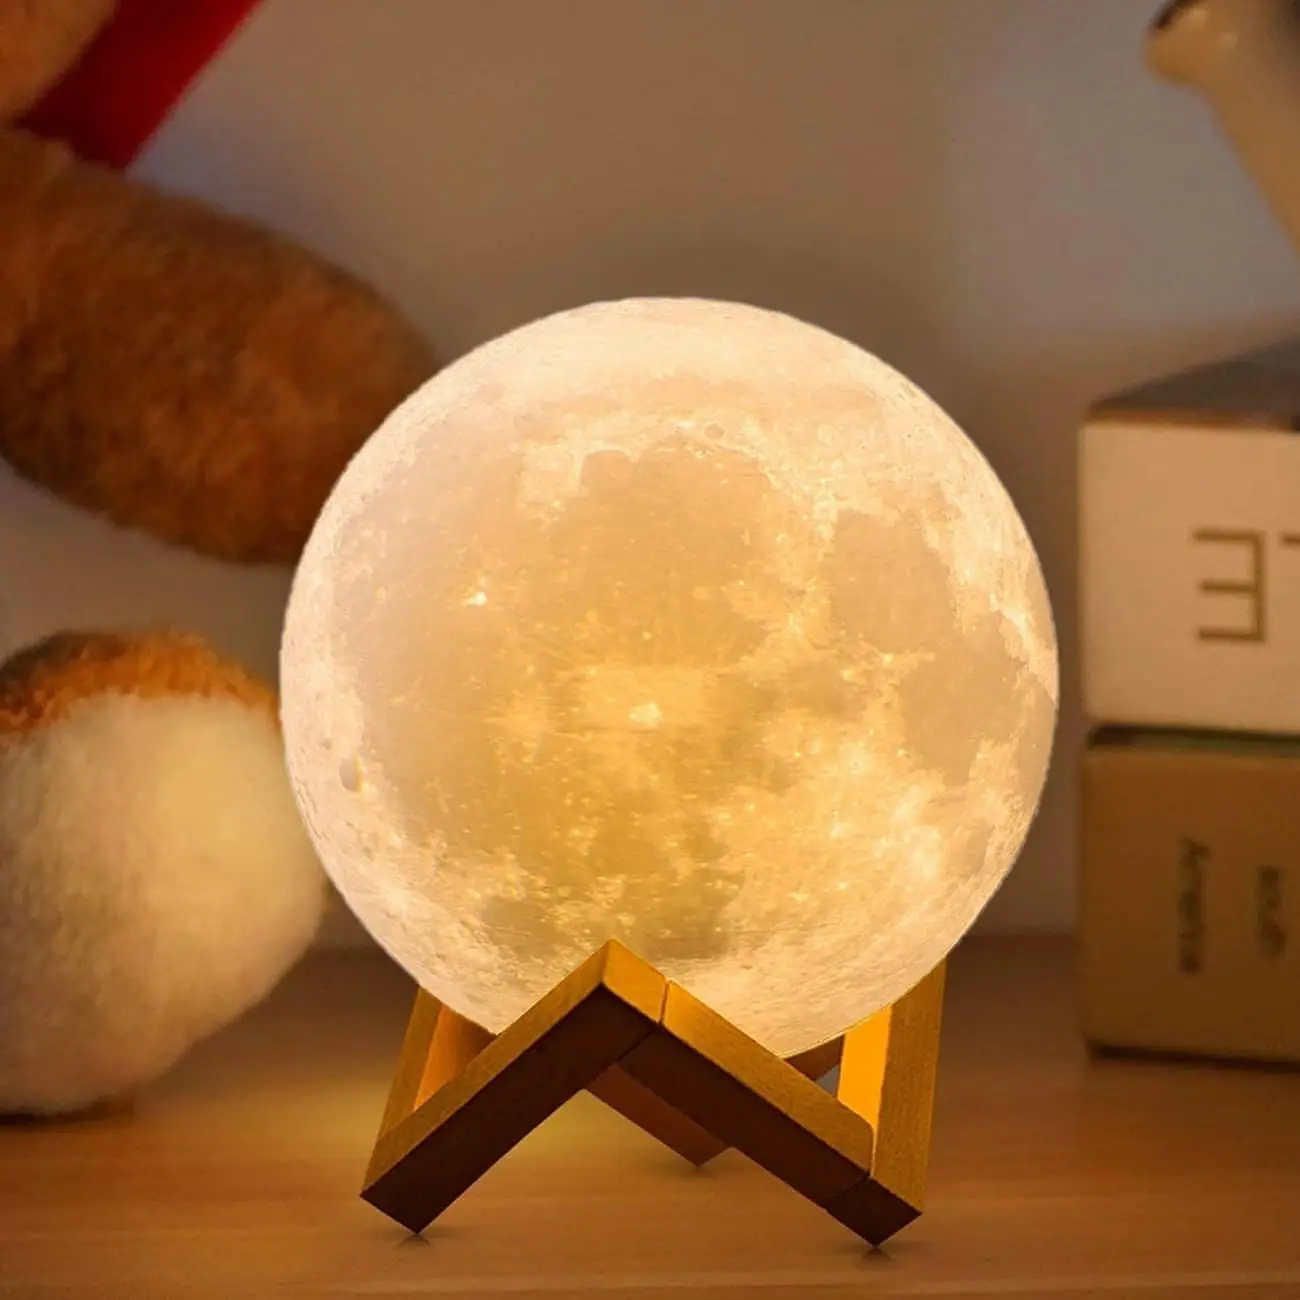 

LED Night Light 3D Print Moon Lamp 8CM/12CM USB Powered With Stand Starry Lamp 16 Color Bedroom Decor Night Lights Kids Gift